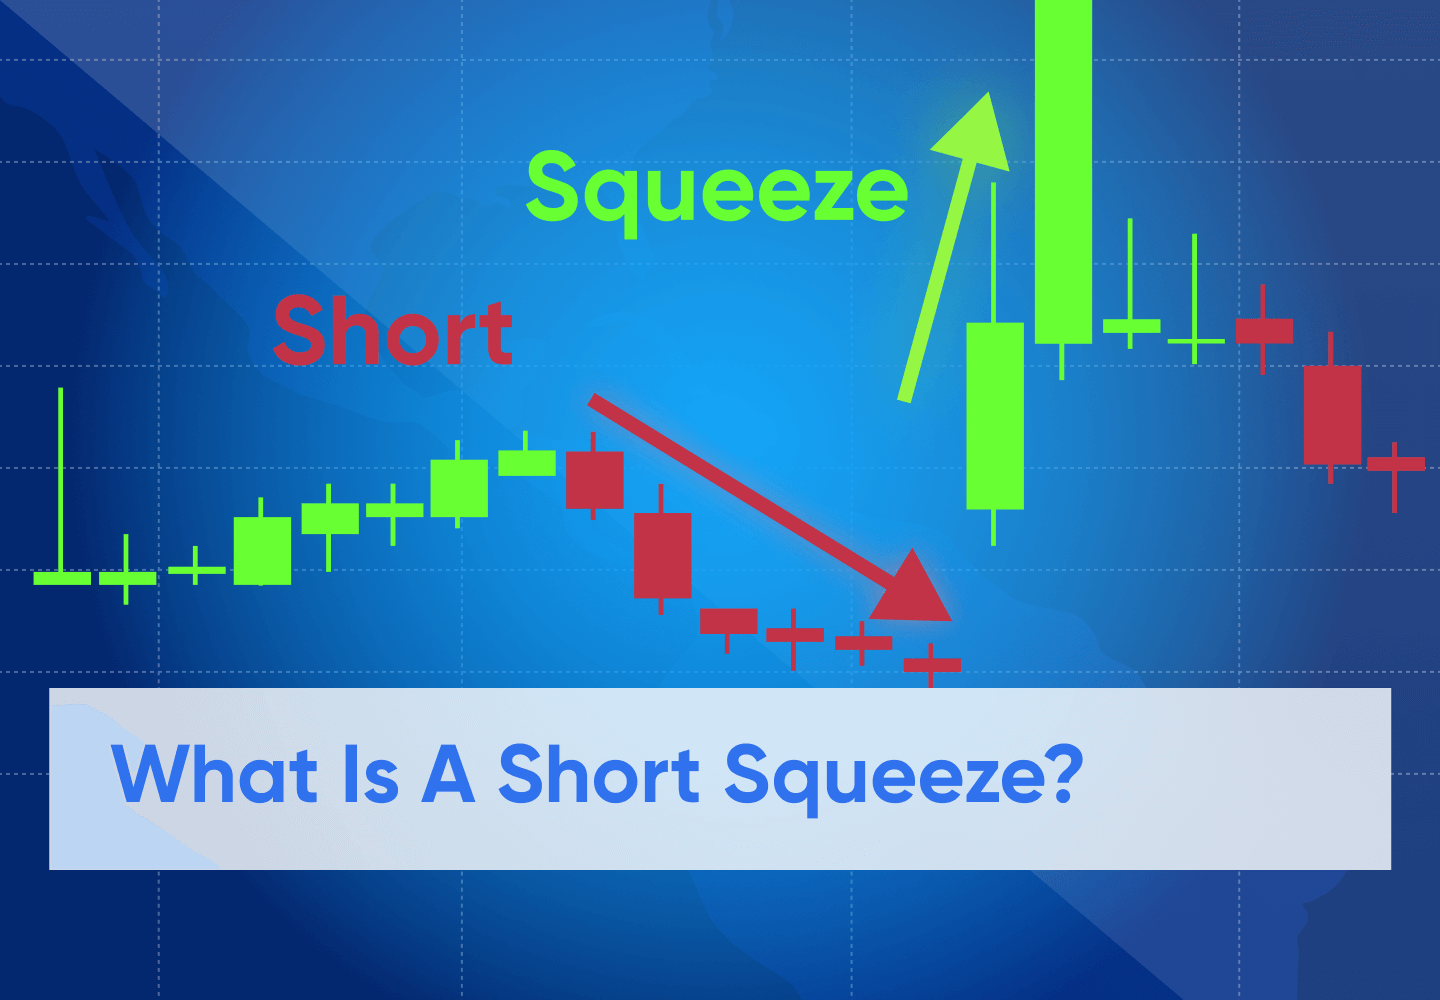 What Is A Short Squeeze?